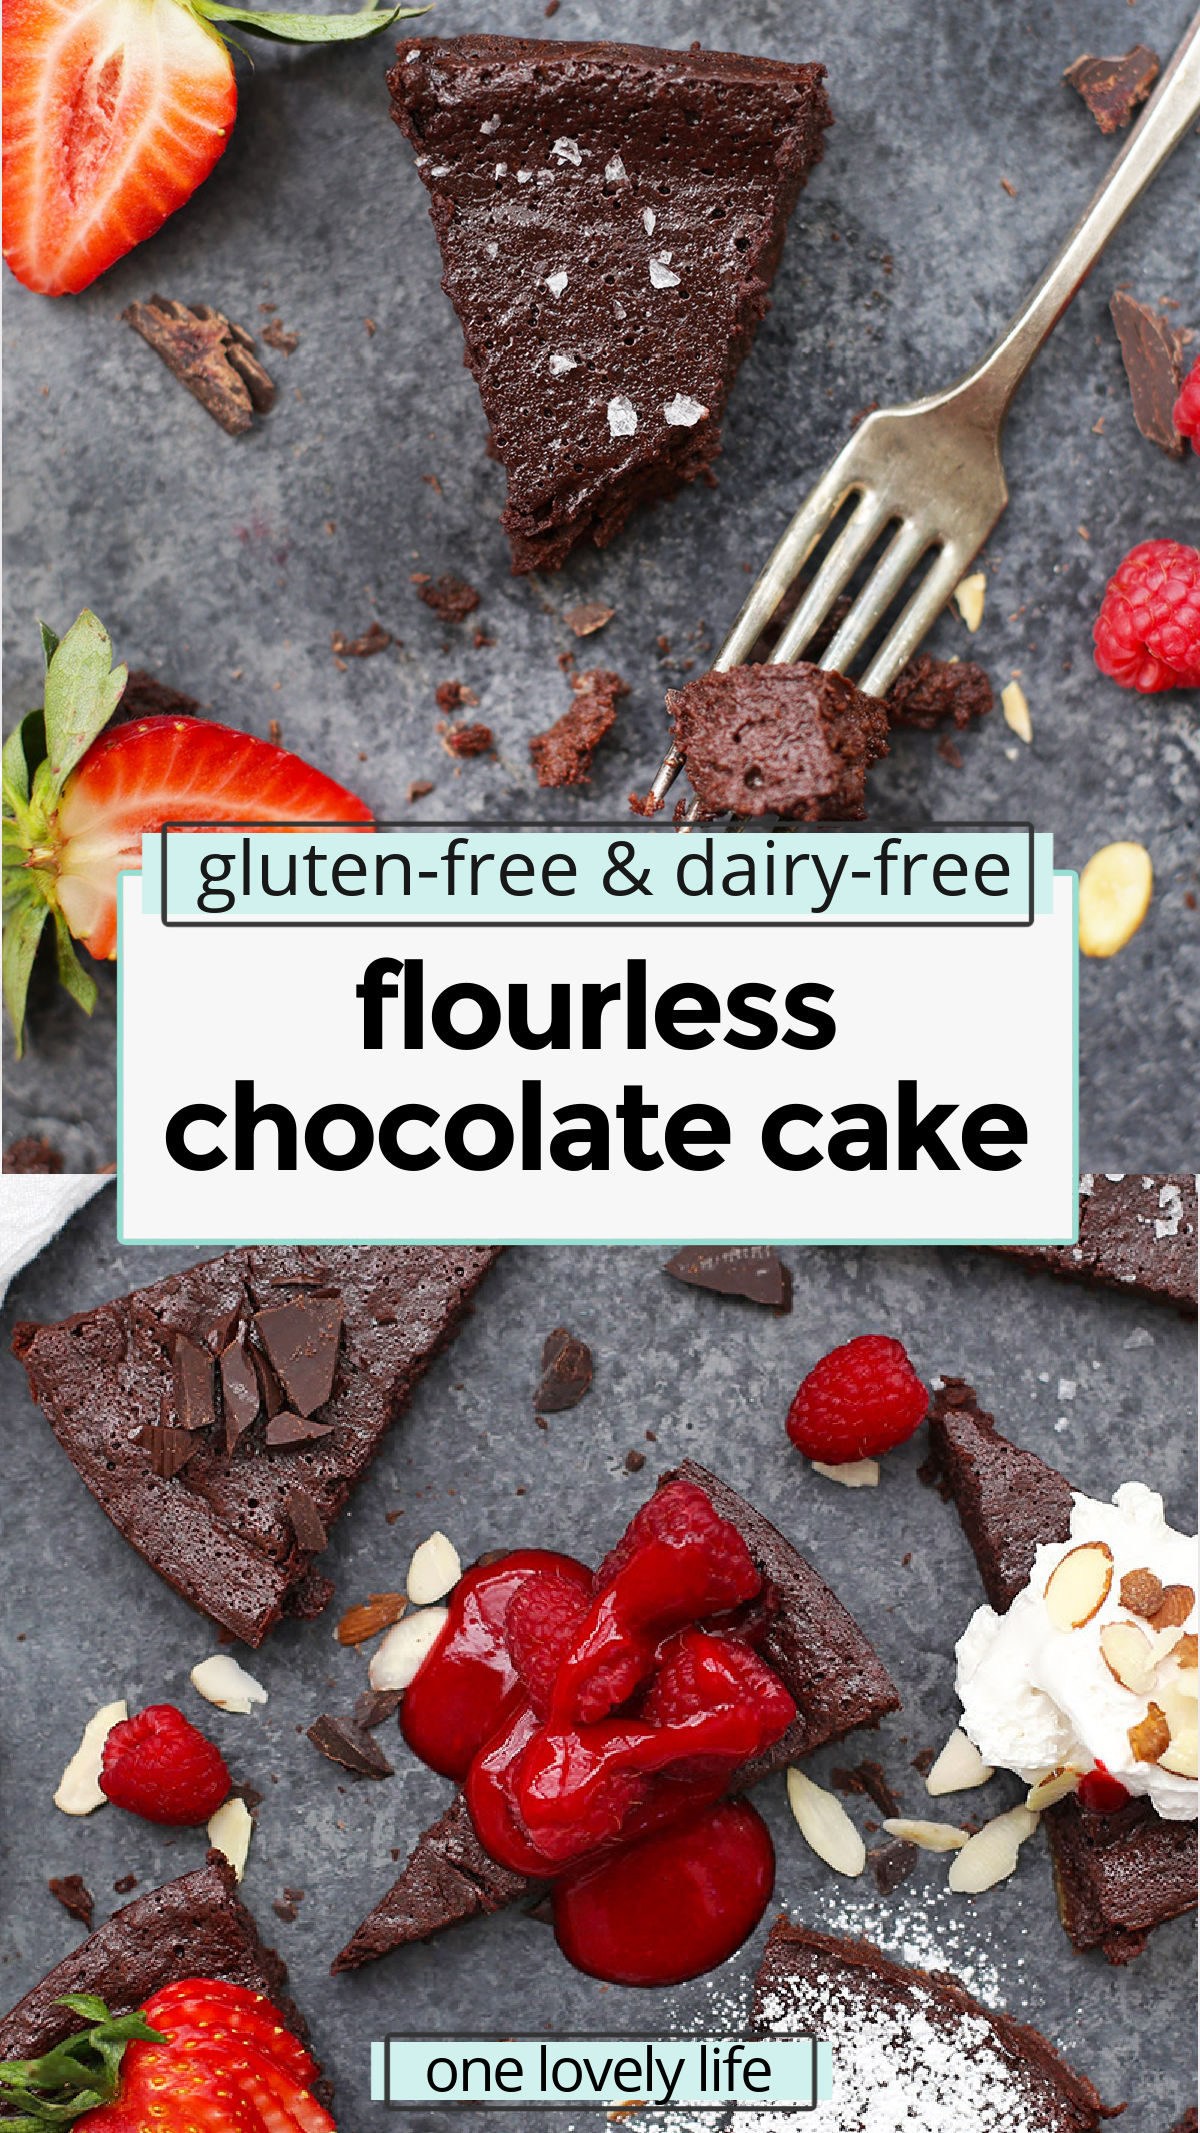 Flourless Chocolate Cake - This dense, perfectly rich chocolate cake is gluten free, dairy free, and naturally sweetened, but has all the indulgent decadence you're looking for on a special occasion. Pro tip: don't skip the raspberry sauce! // dairy free flourless chocolate cake recipe // paleo flourless chocolate cake // gluten free flourless chocolate cake // paleo chocolate cake // gluten free chocolate cake #flourlesschocolate cake #chocolatecake #valentinesday